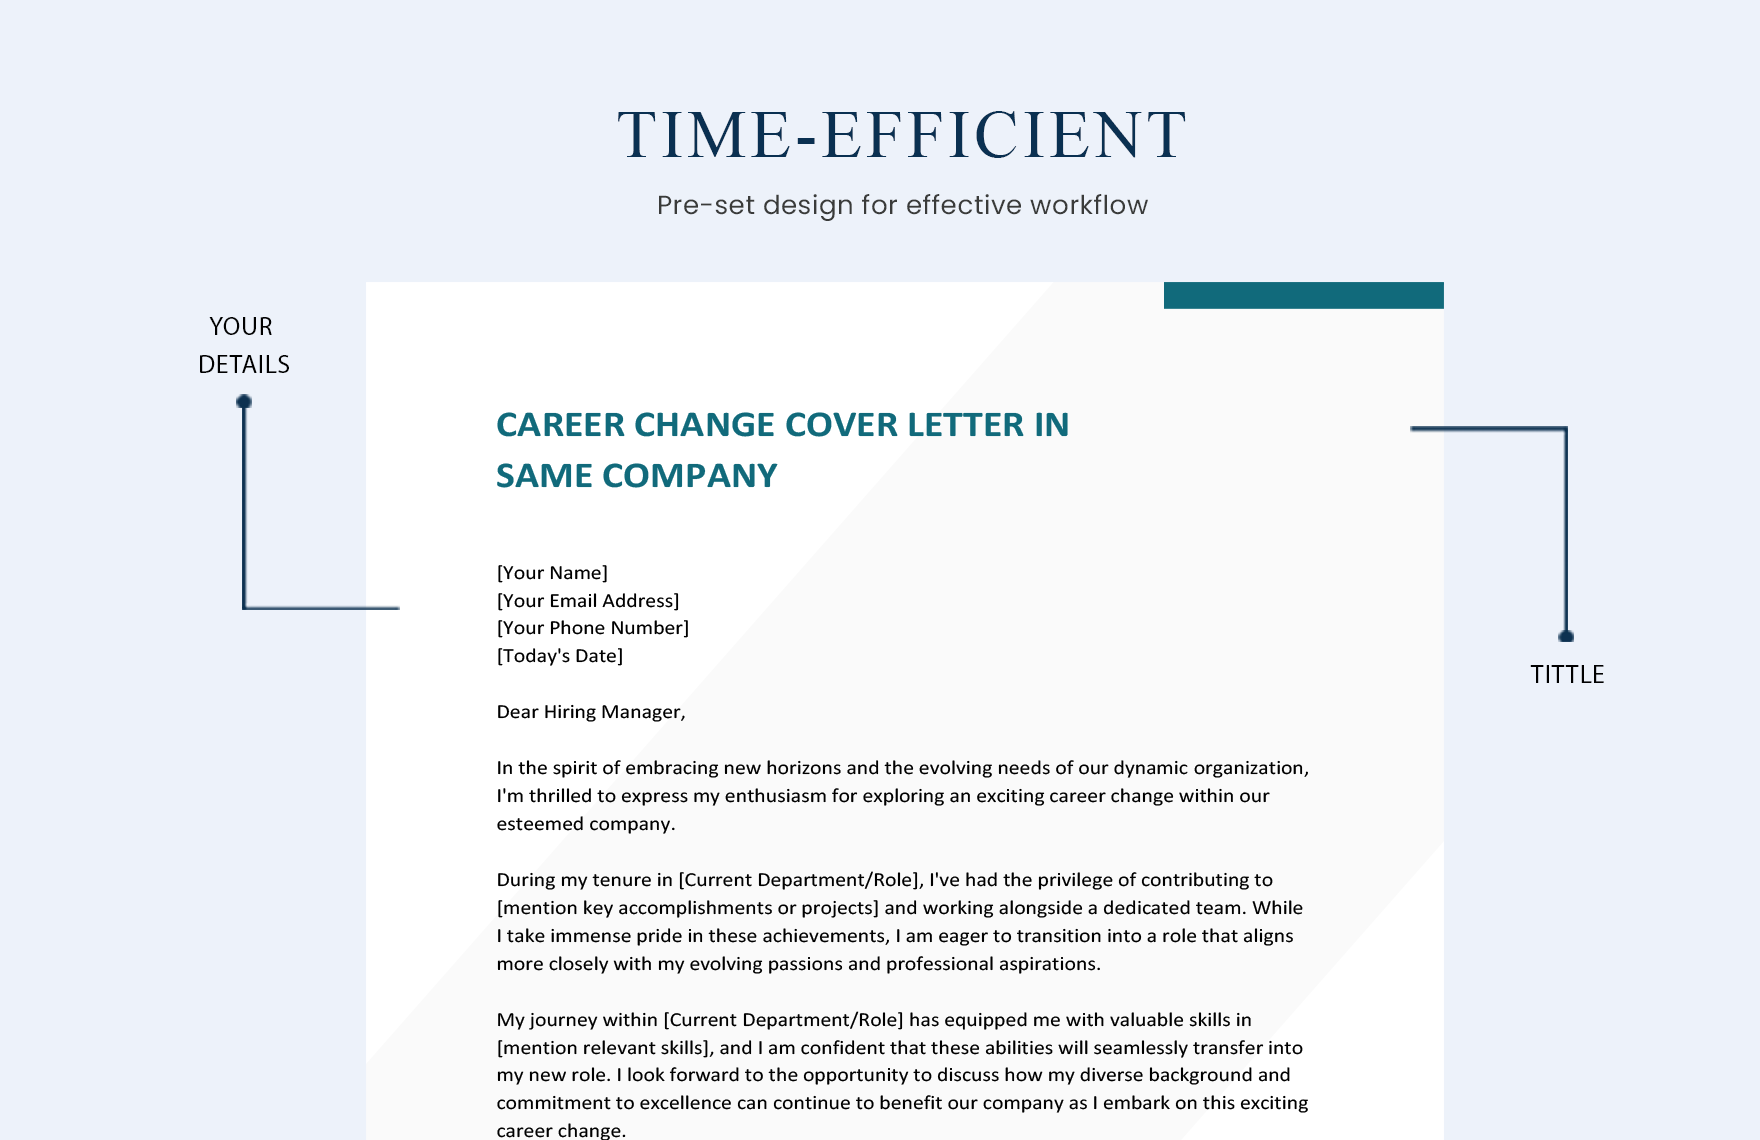 Career Change Cover Letter In Same Company